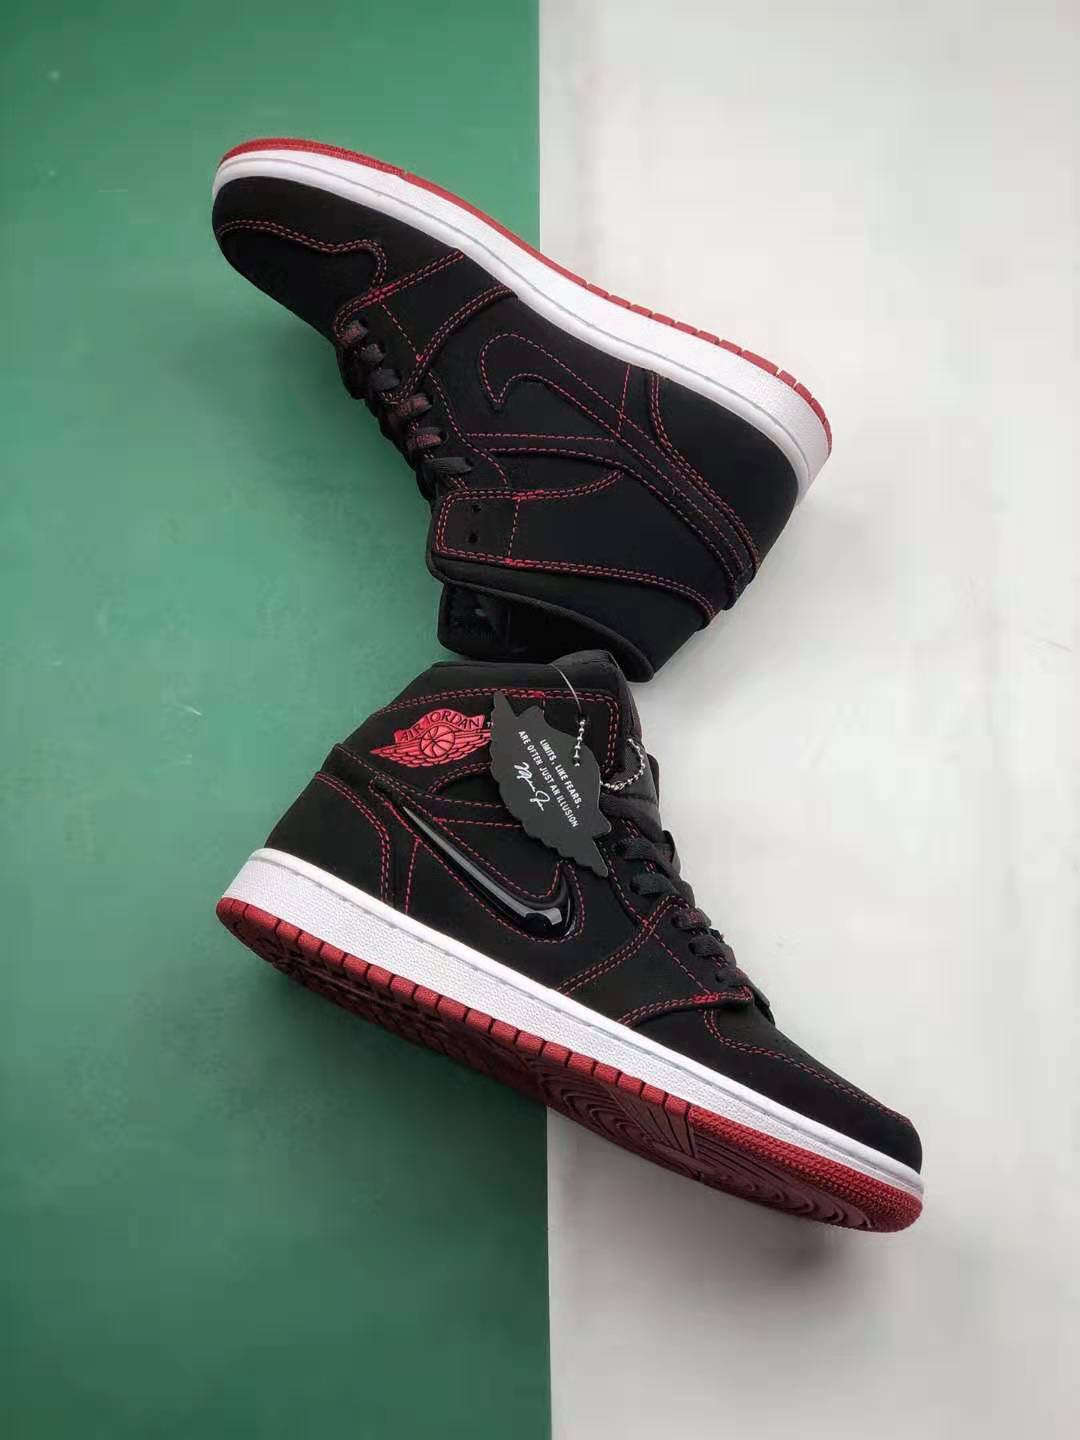 Air Jordan 1 Mid 'Come Fly With Me' CK5665-062 - Elevate Your Style with These Classic Sneakers